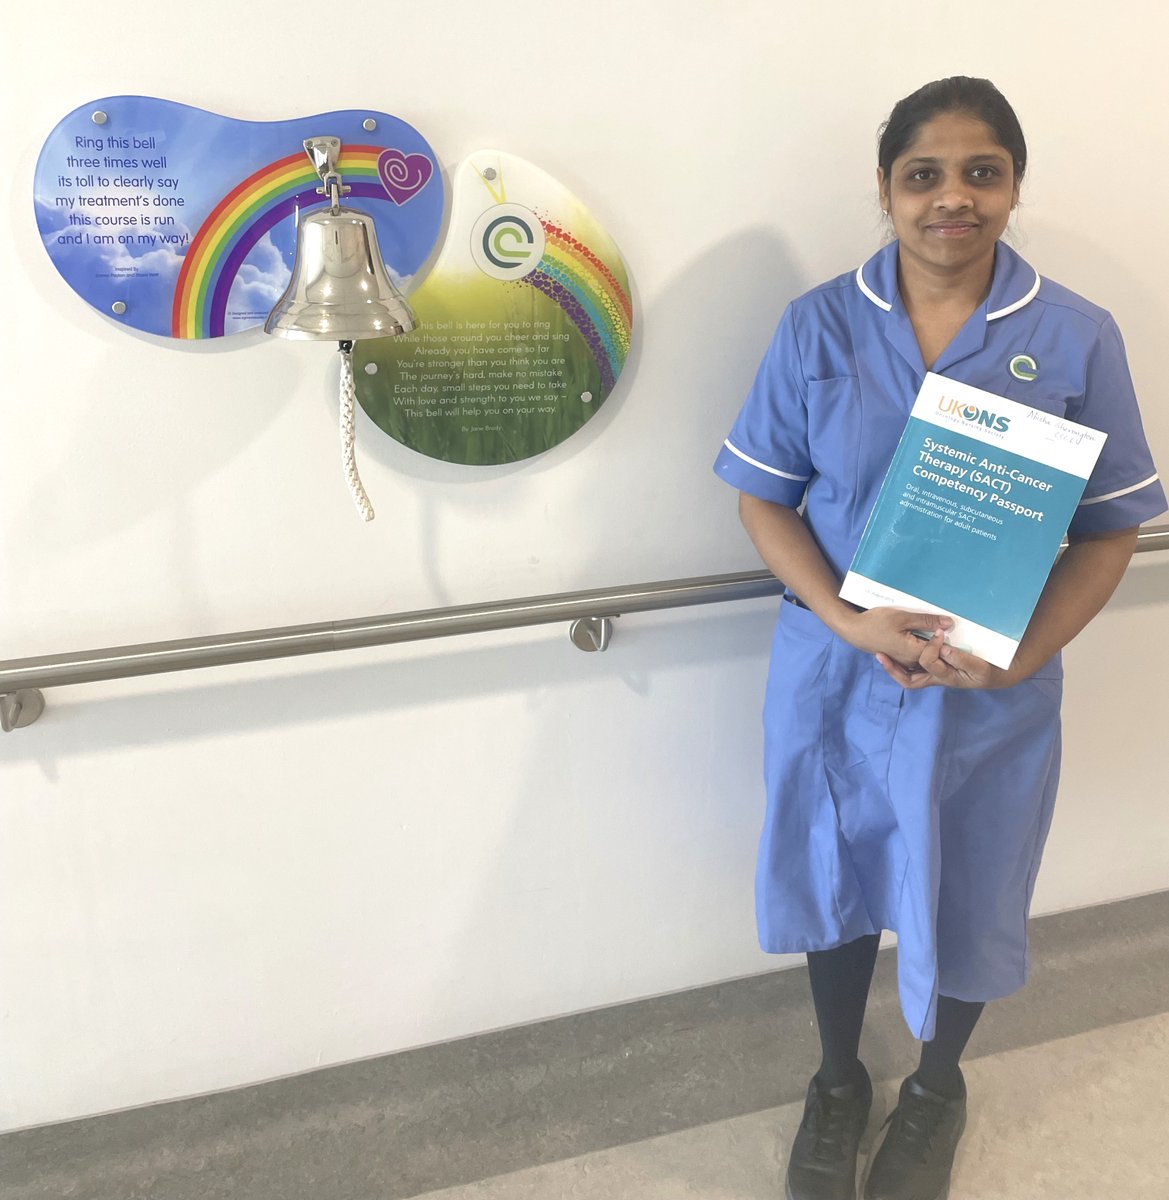 Continuing our #InternationalNursesDay celebrations, join us in congratulating our fab international nurse, Abisha who has completed her Systemic Anti-Cancer Therapy Passport! The passport assesses chemotherapy skills for cancer nurses and helps our staff deliver the best care 👏